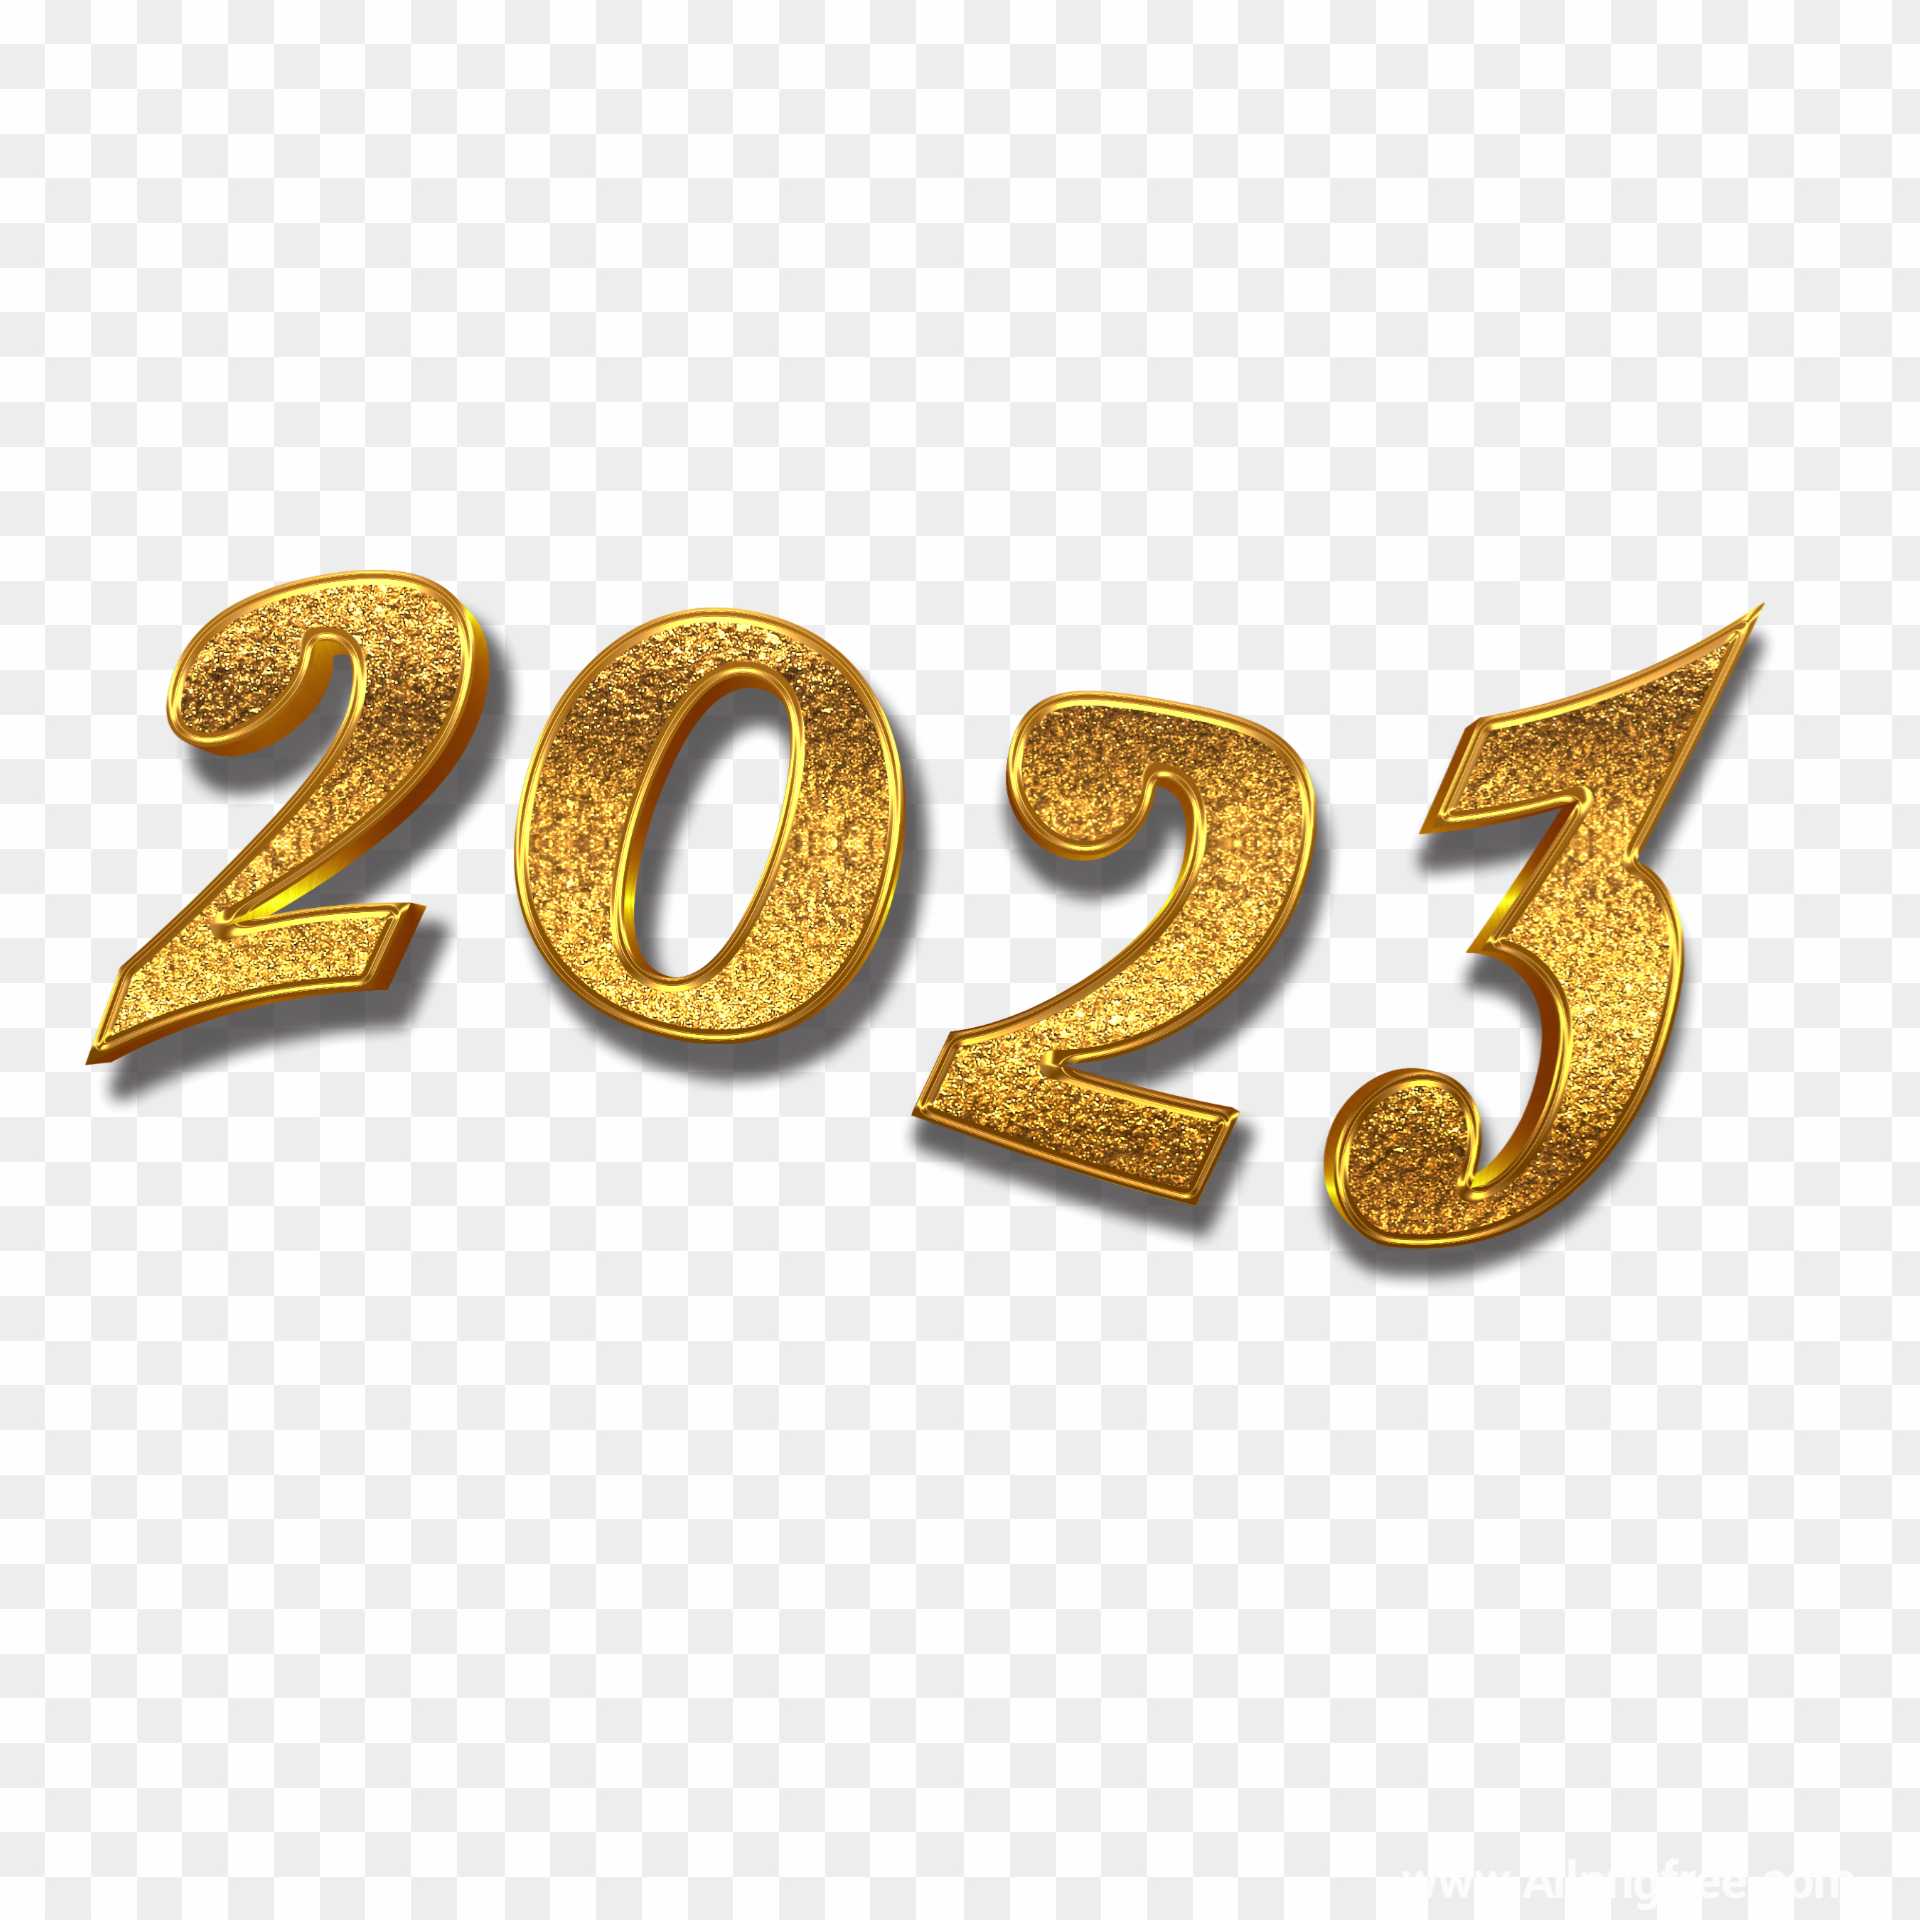 New year 2023 PNG images